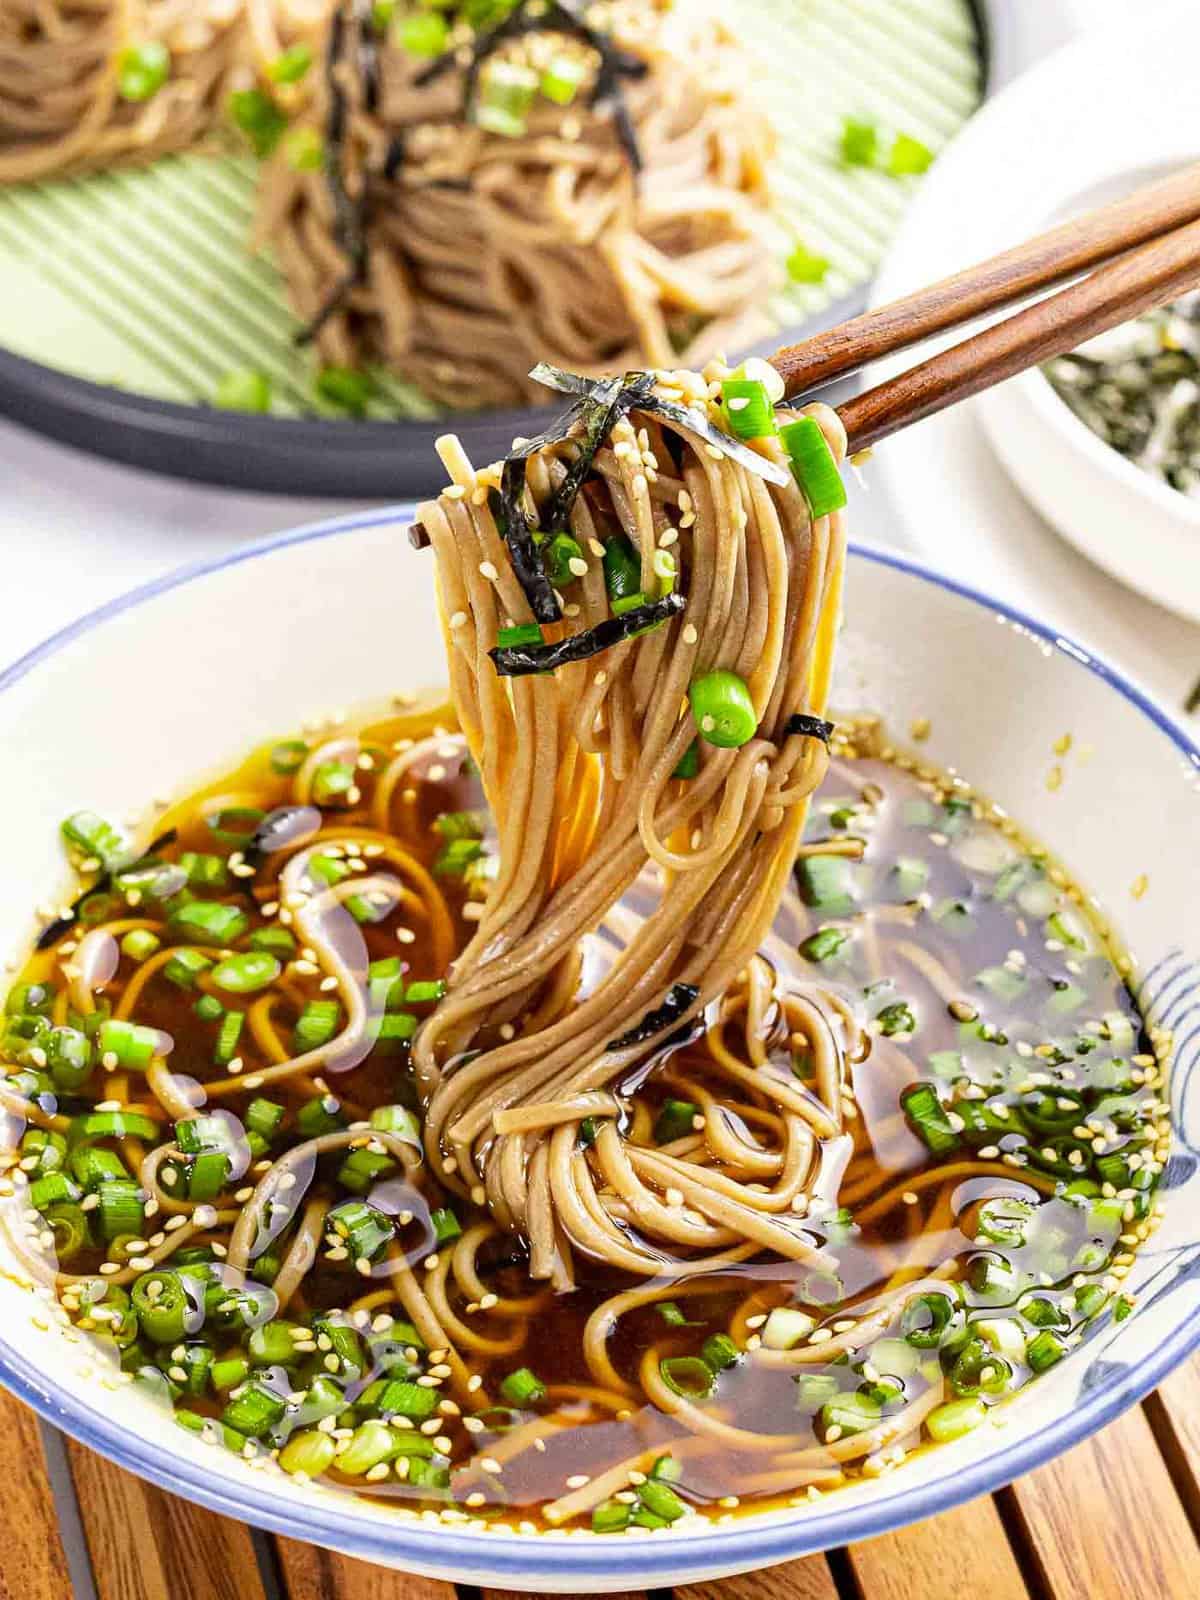 Zaru soba or cold soba noodles with tsuyu dipping sauce.